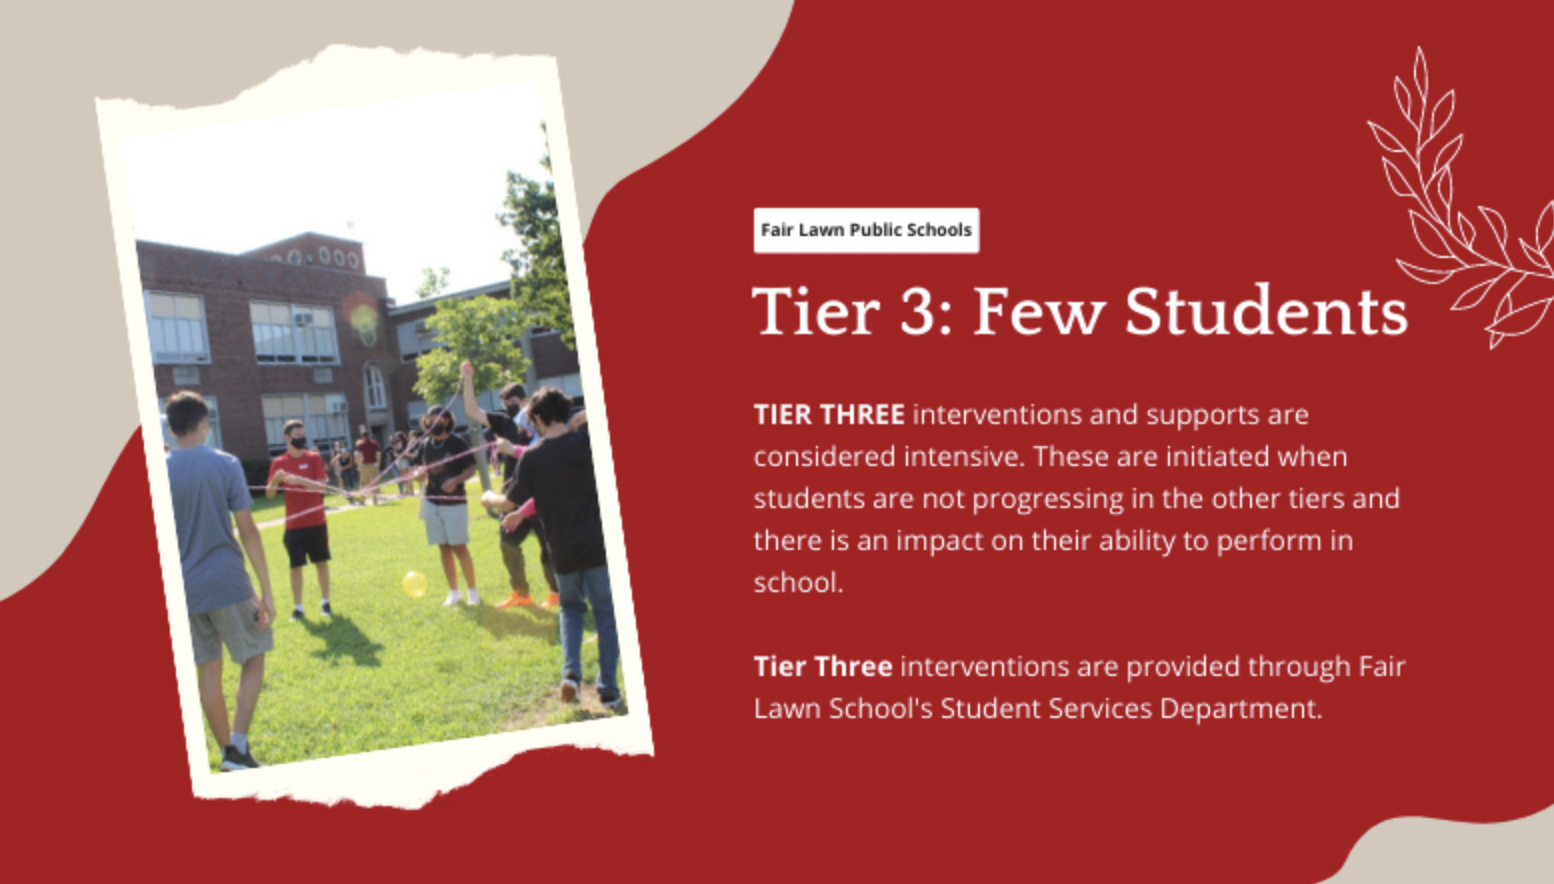 tier 3 how we support few students